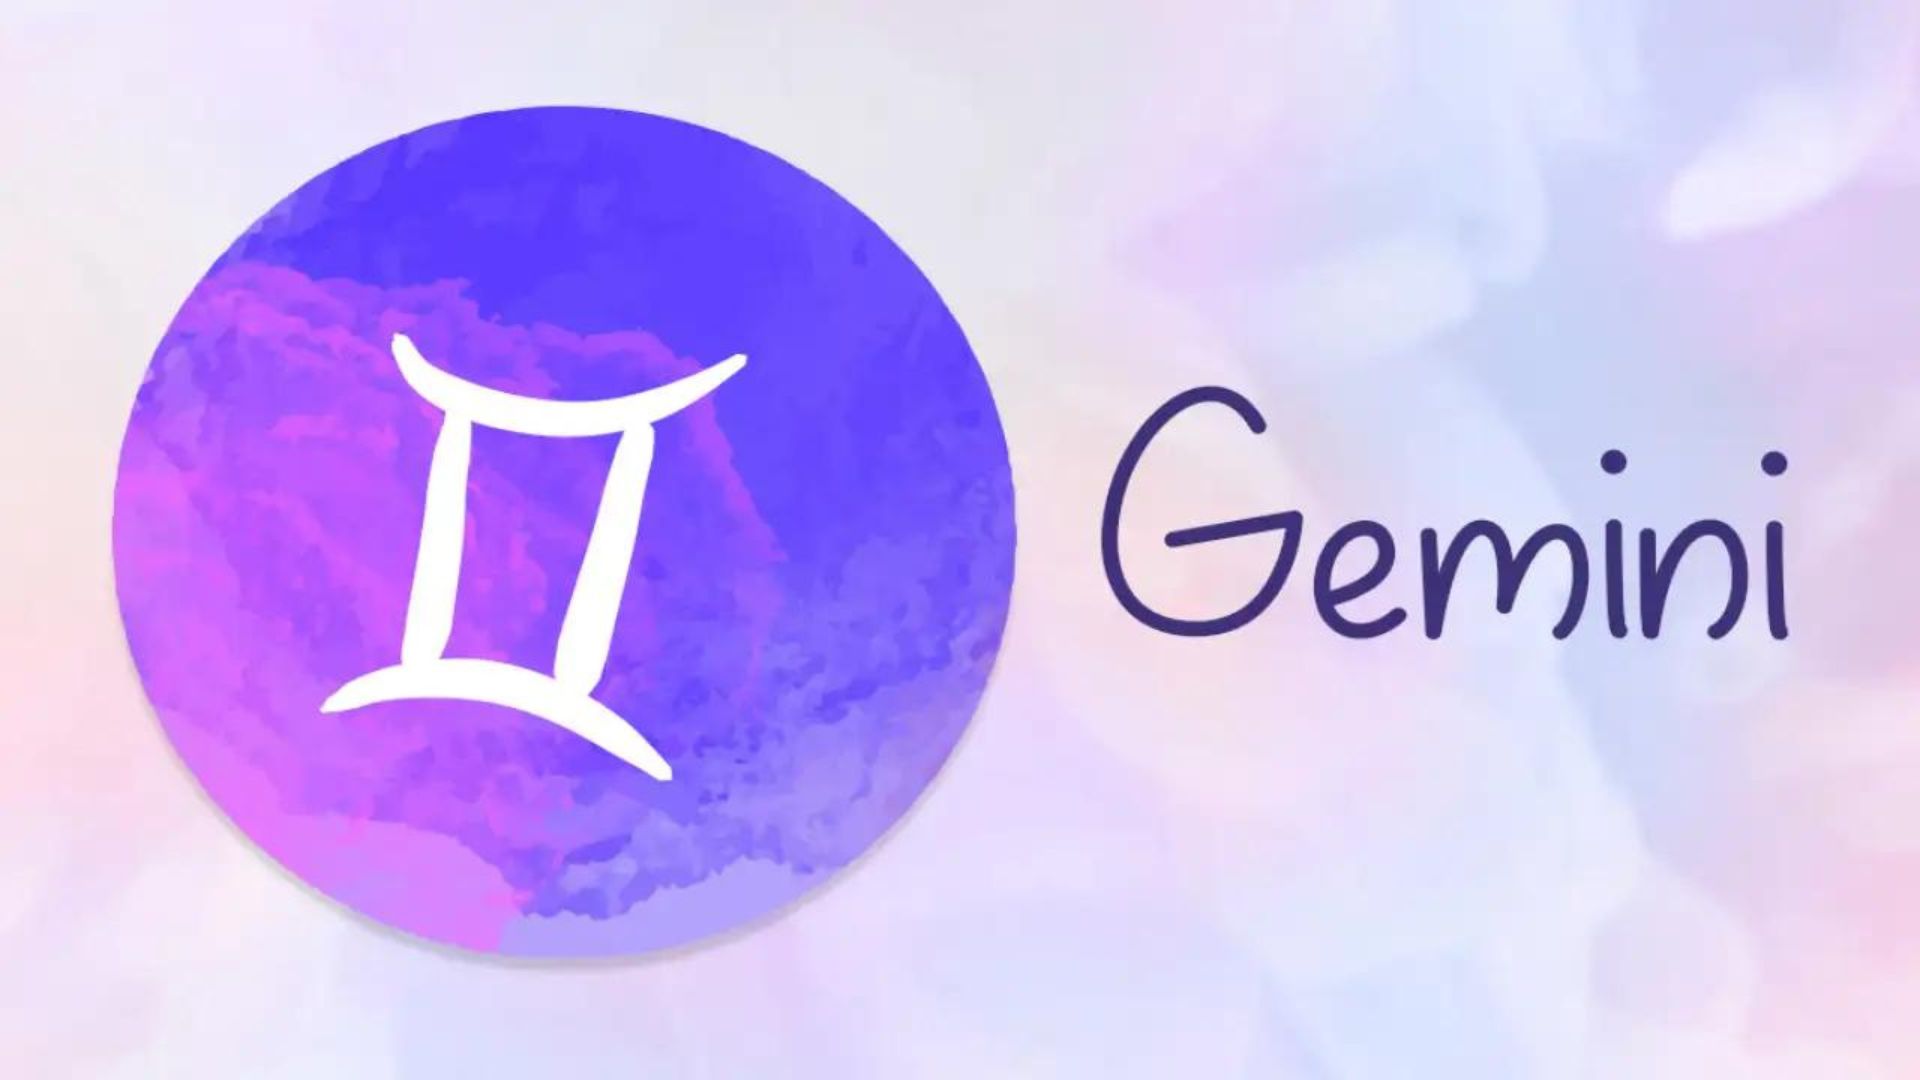 Gemini Sign With Purple Color In Background